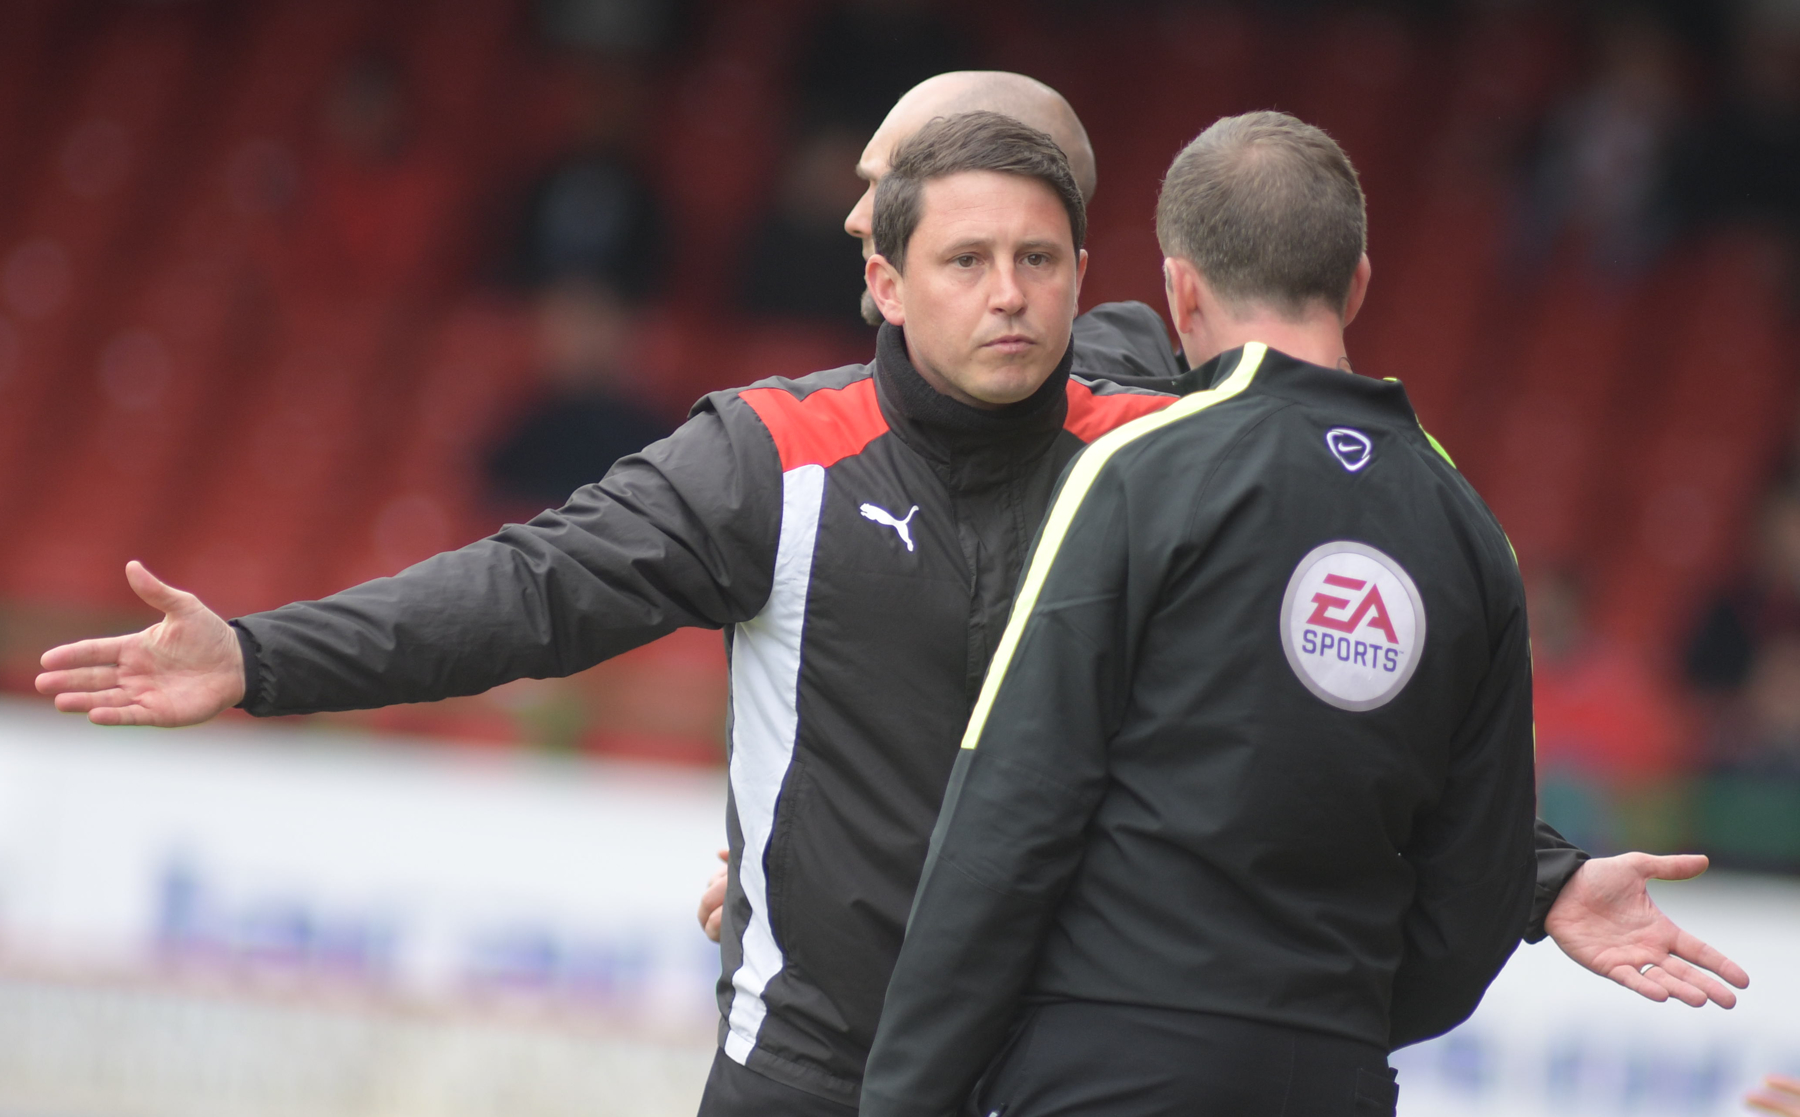 PREVIEW: Walsall vs Swindon Town